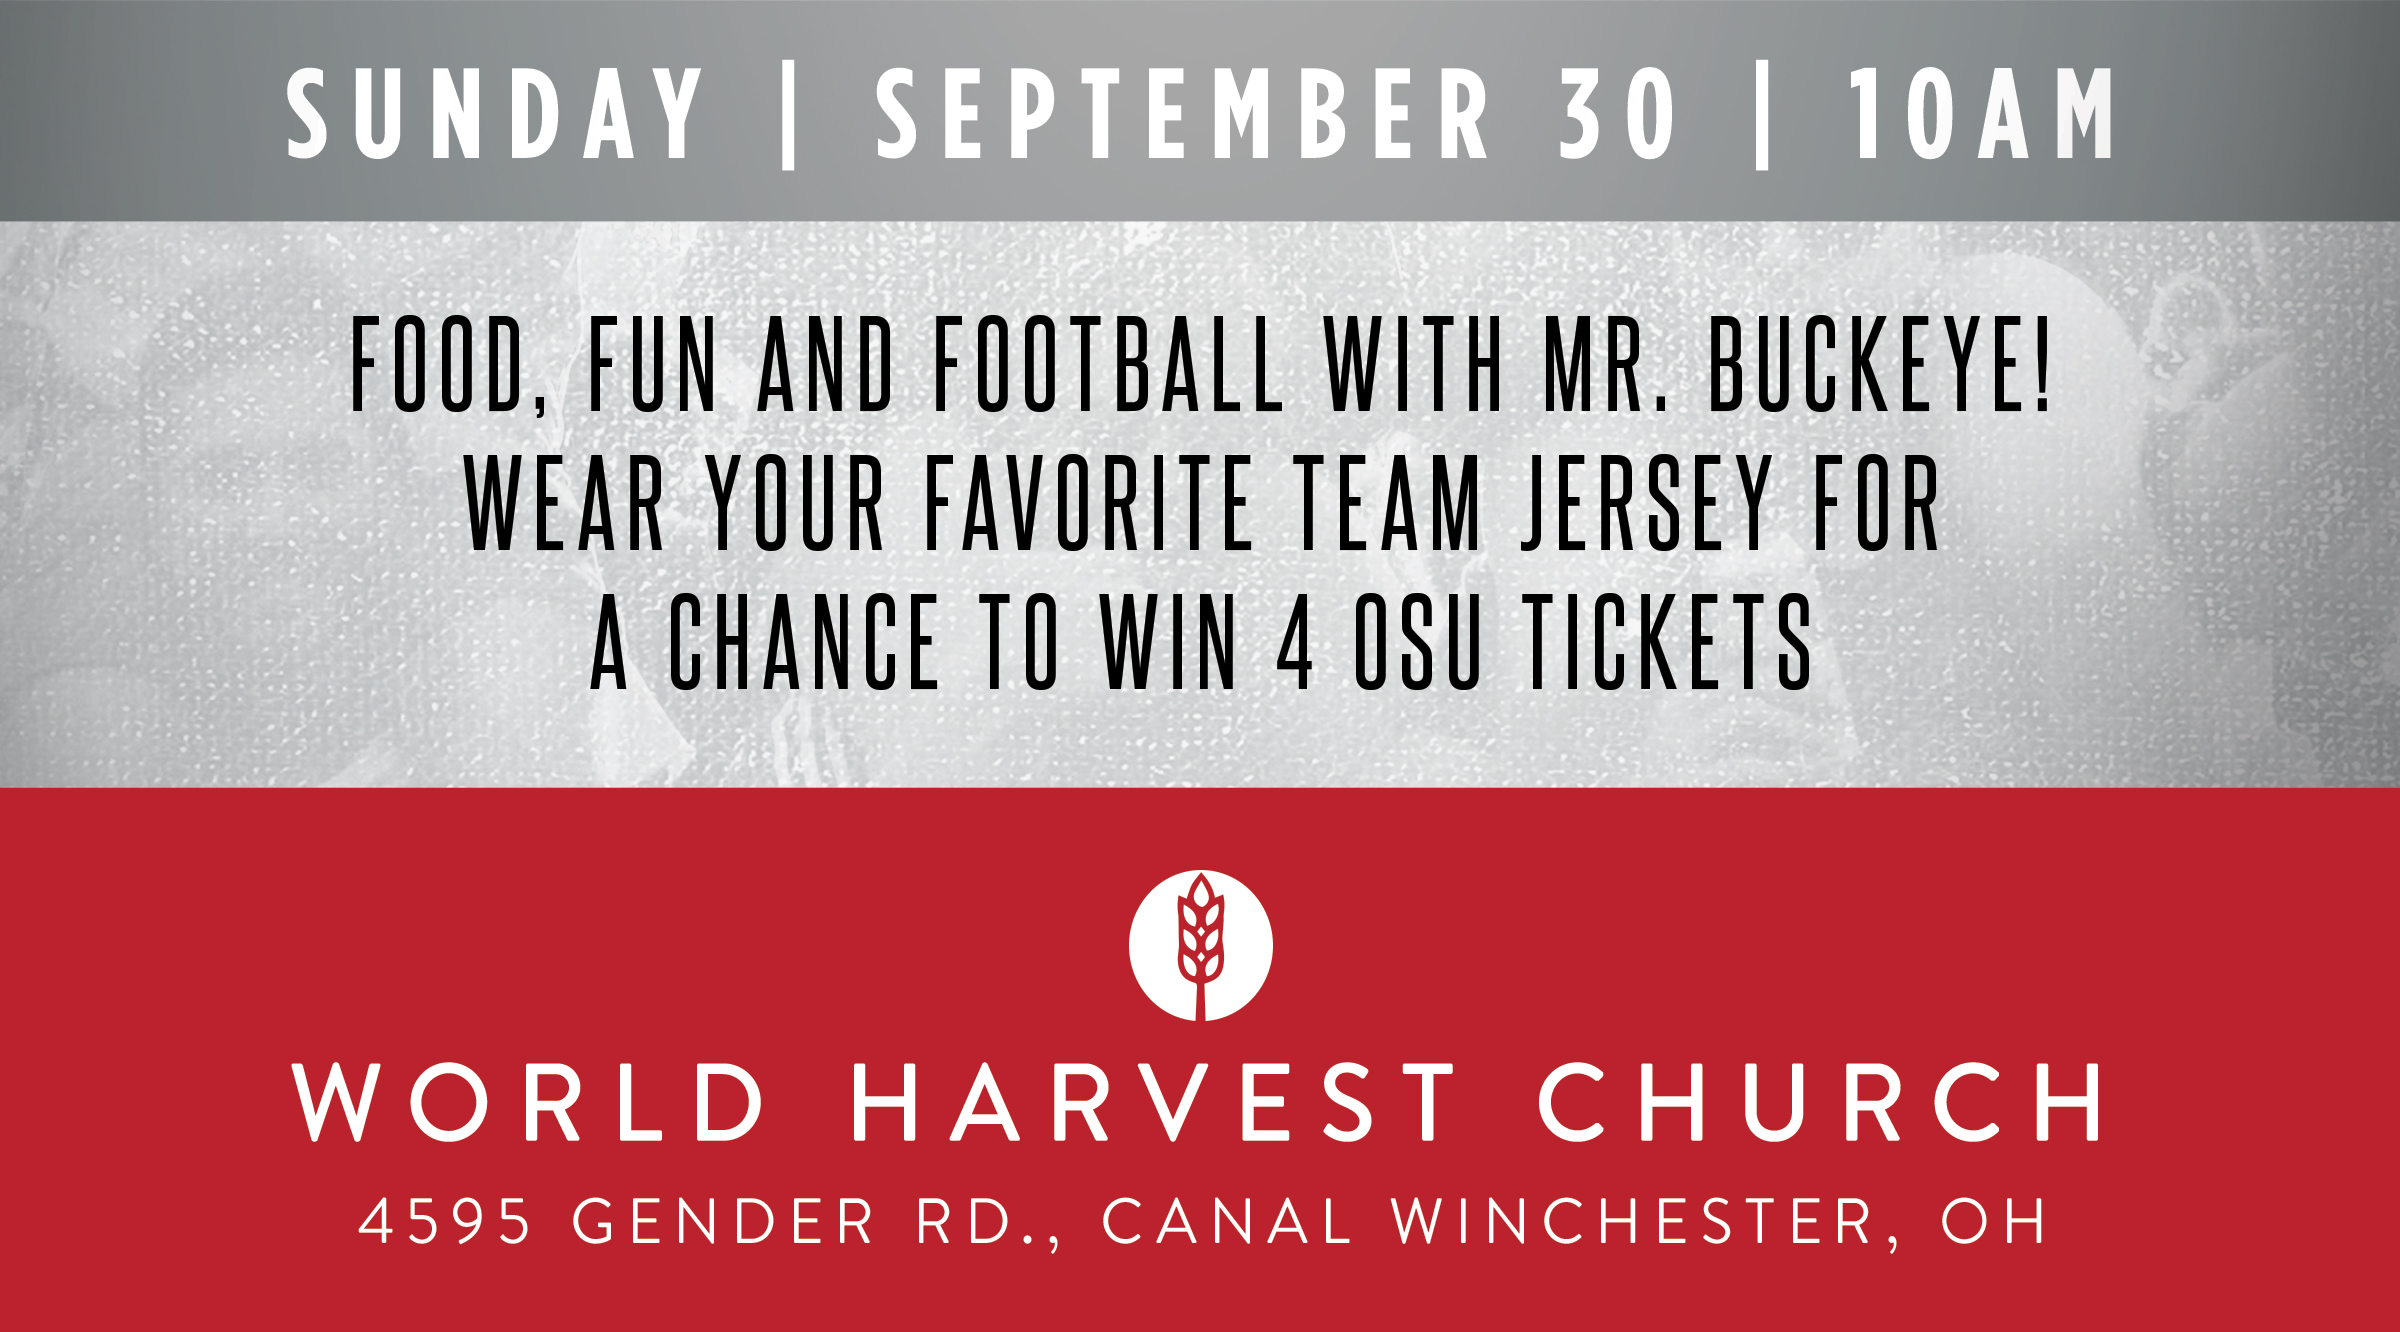 Sunday, September 30, 10am | Food, Fun and Football with Mr. Buckeye! Wear your favorite team jersey for a chance to win 4 OSU tickets | World Harvest Church | 4595 Gender road, Cancal-Winchester, OH